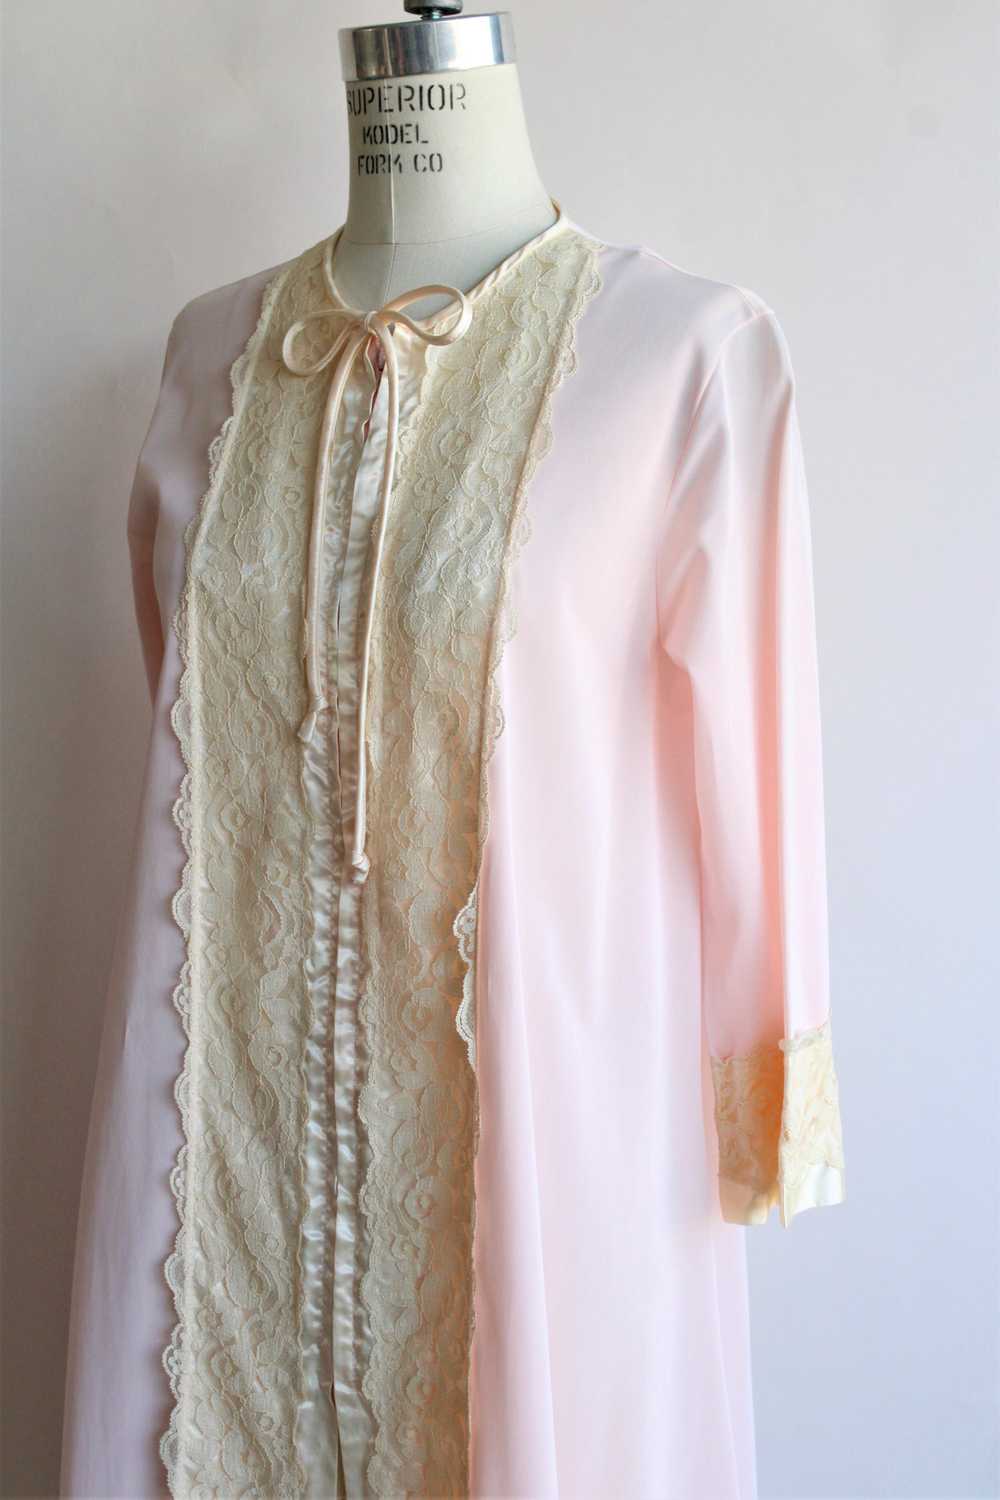 Vintage 1970s Gilead Pink And Lace Nylon Robe wit… - image 6